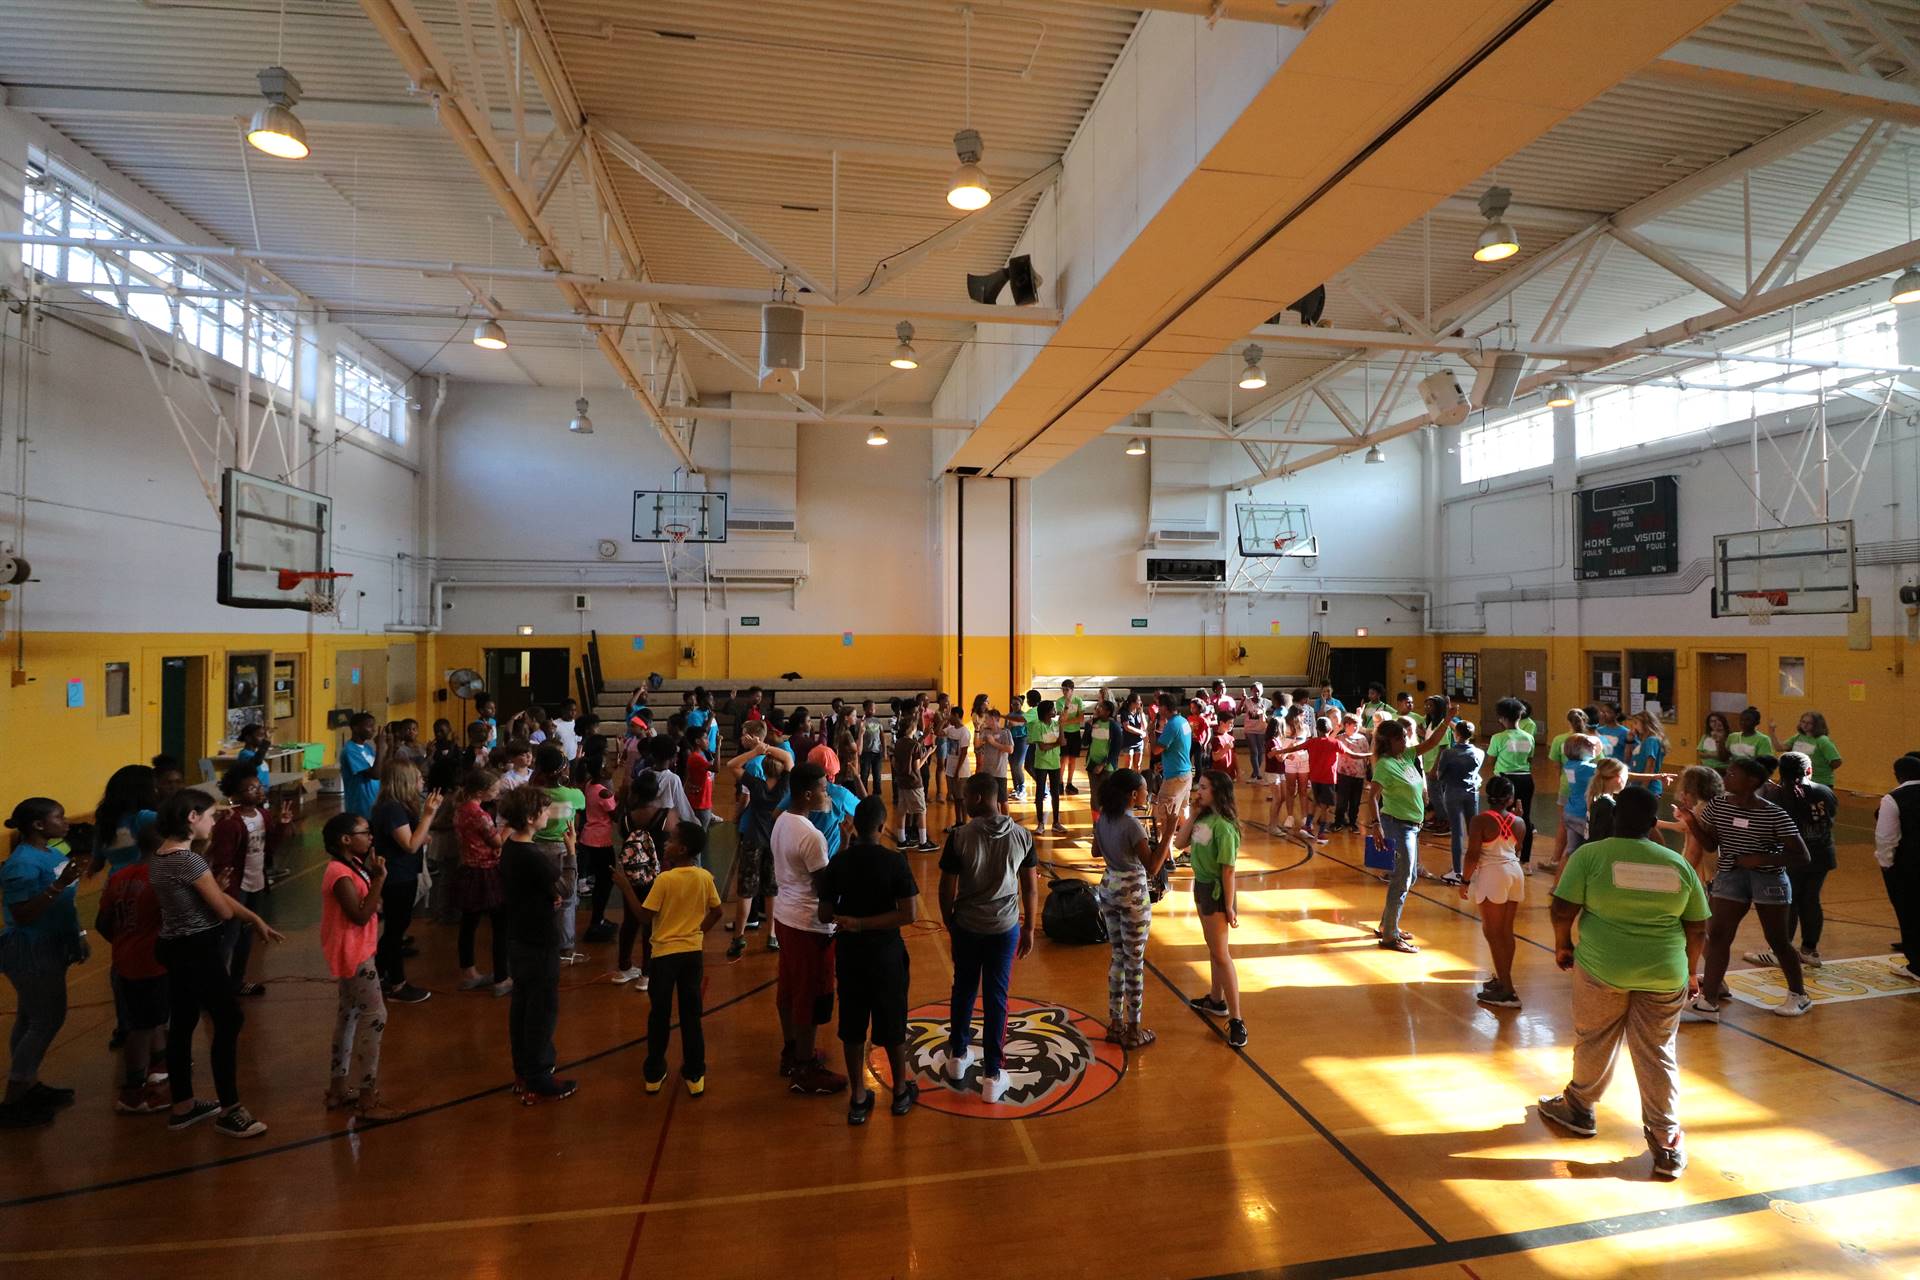 Students gathered on gym floor